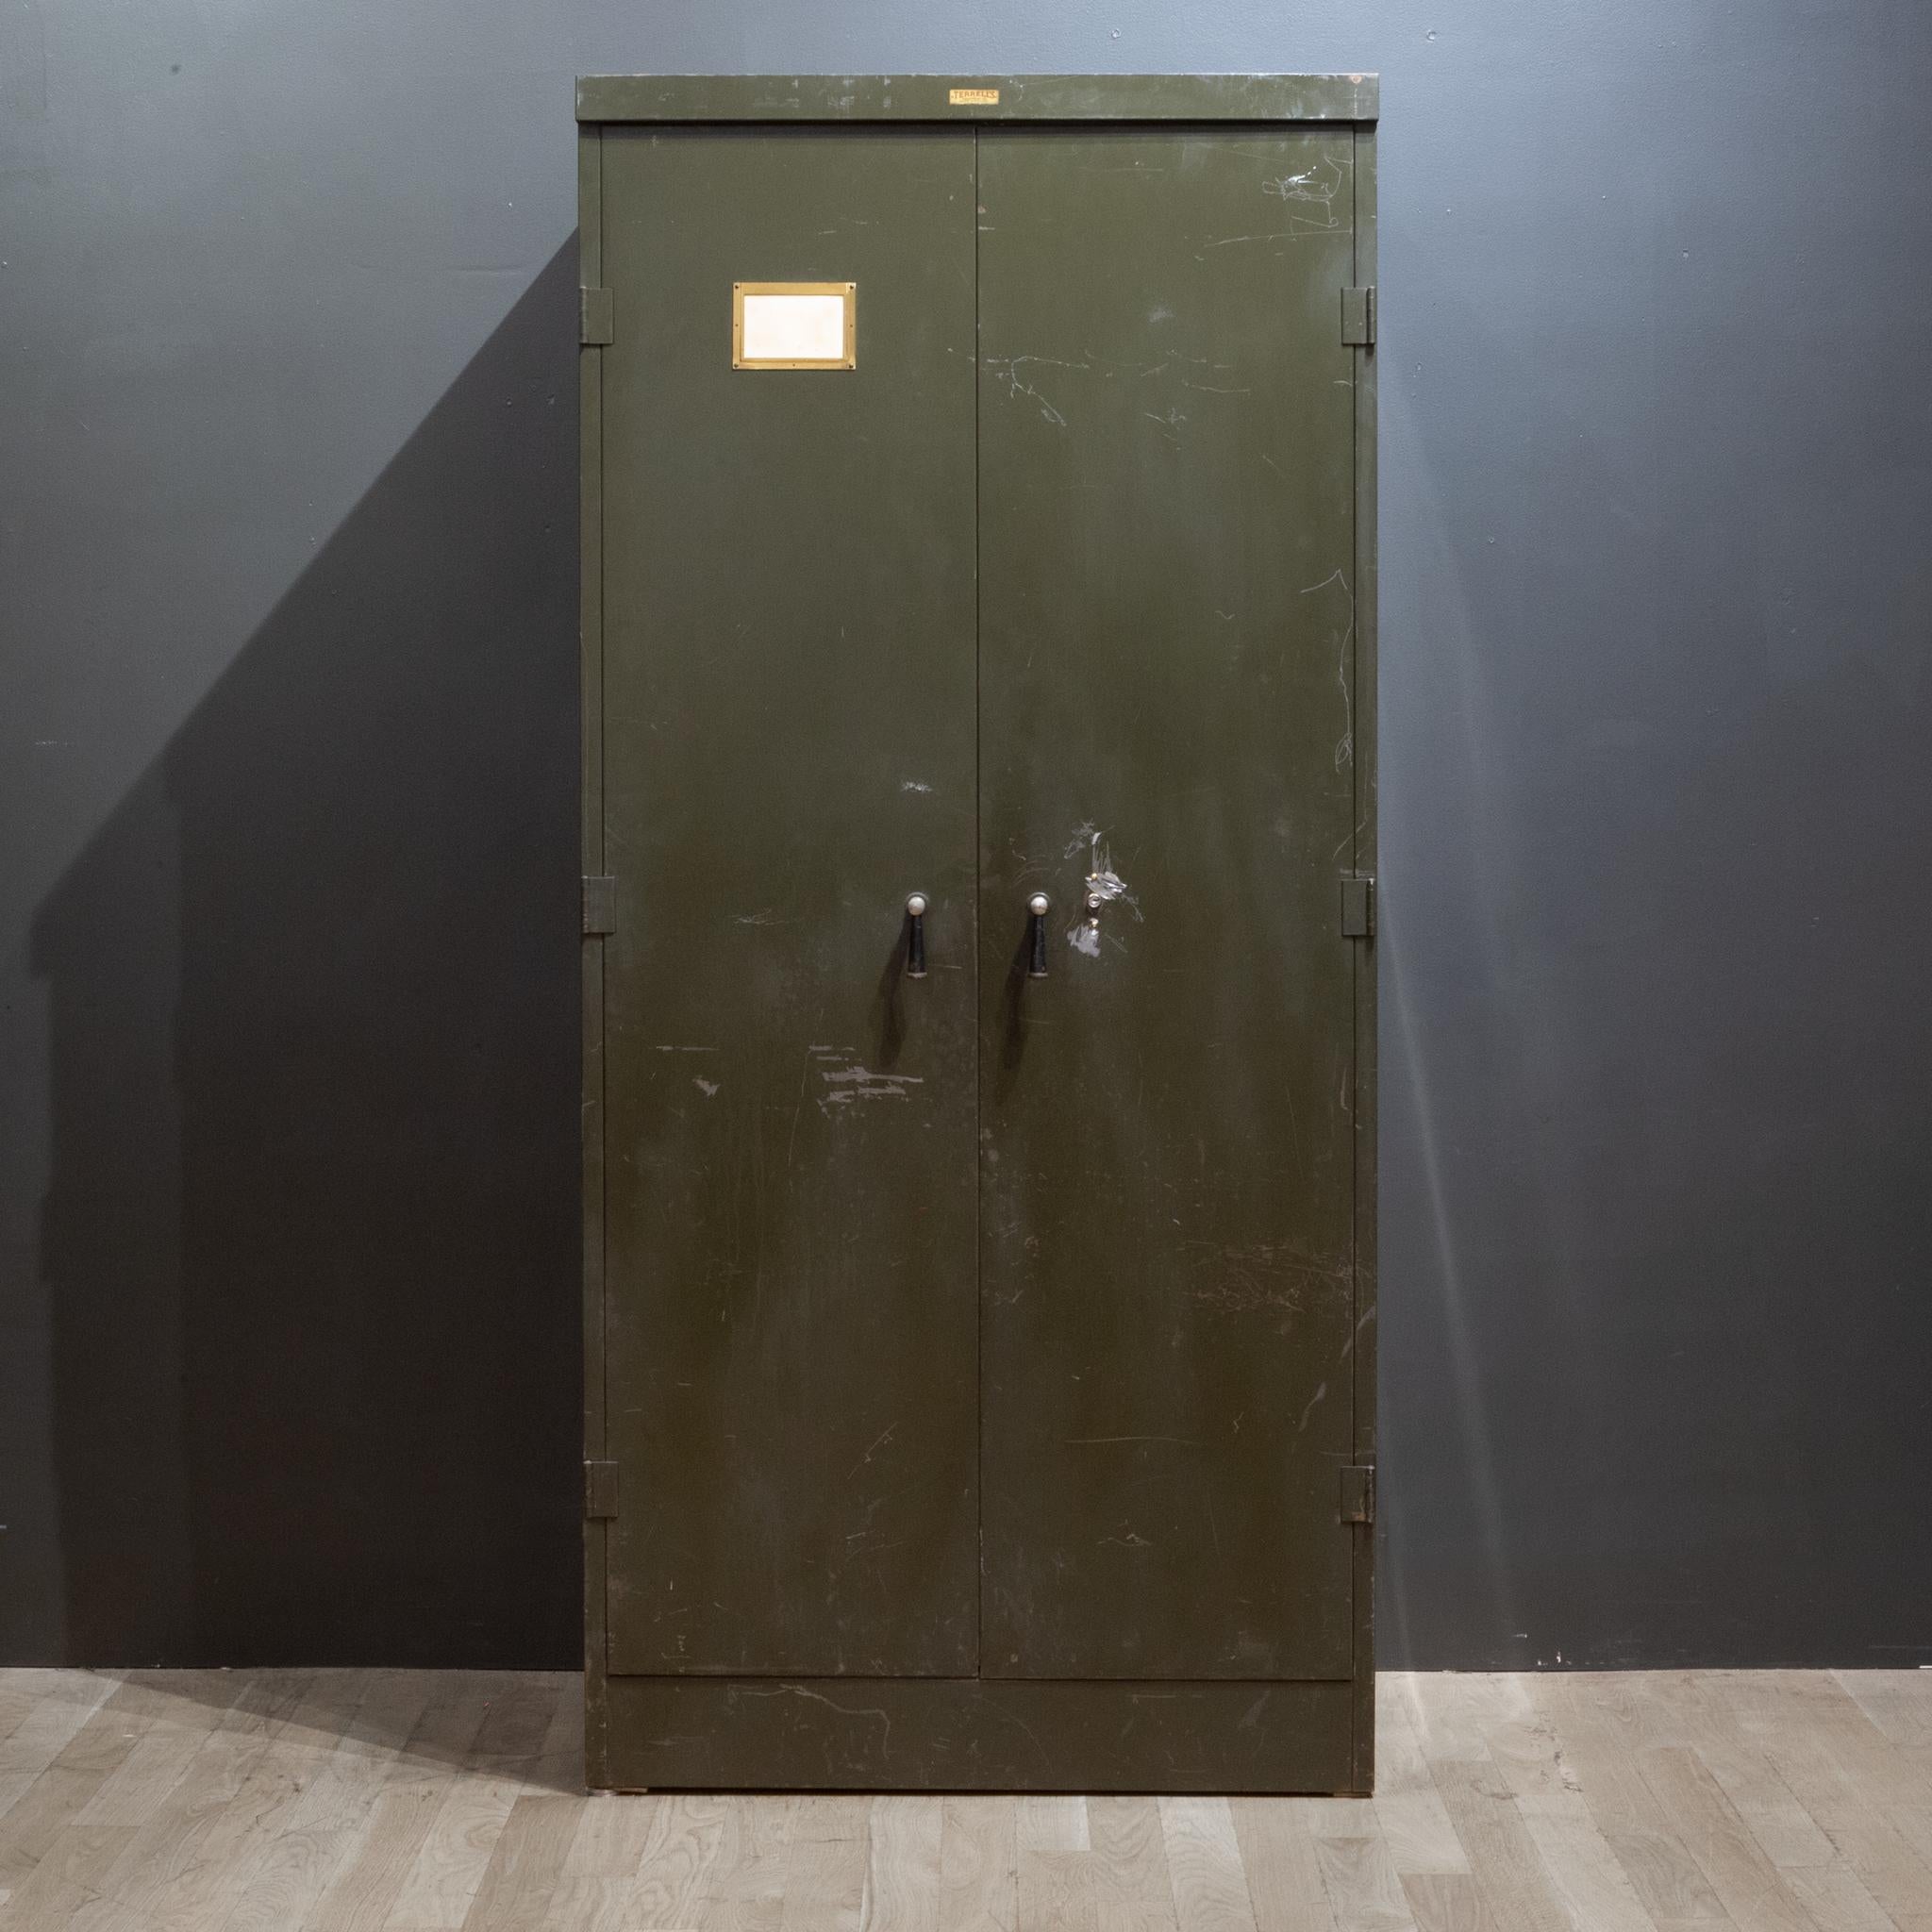 HEAVY Vintage Metal Cabinets, Double Metal Cabinet, Stackable Cabinets,  INDUSTRIAL Storage Organization, Army GREEN, Table File Cabinet 